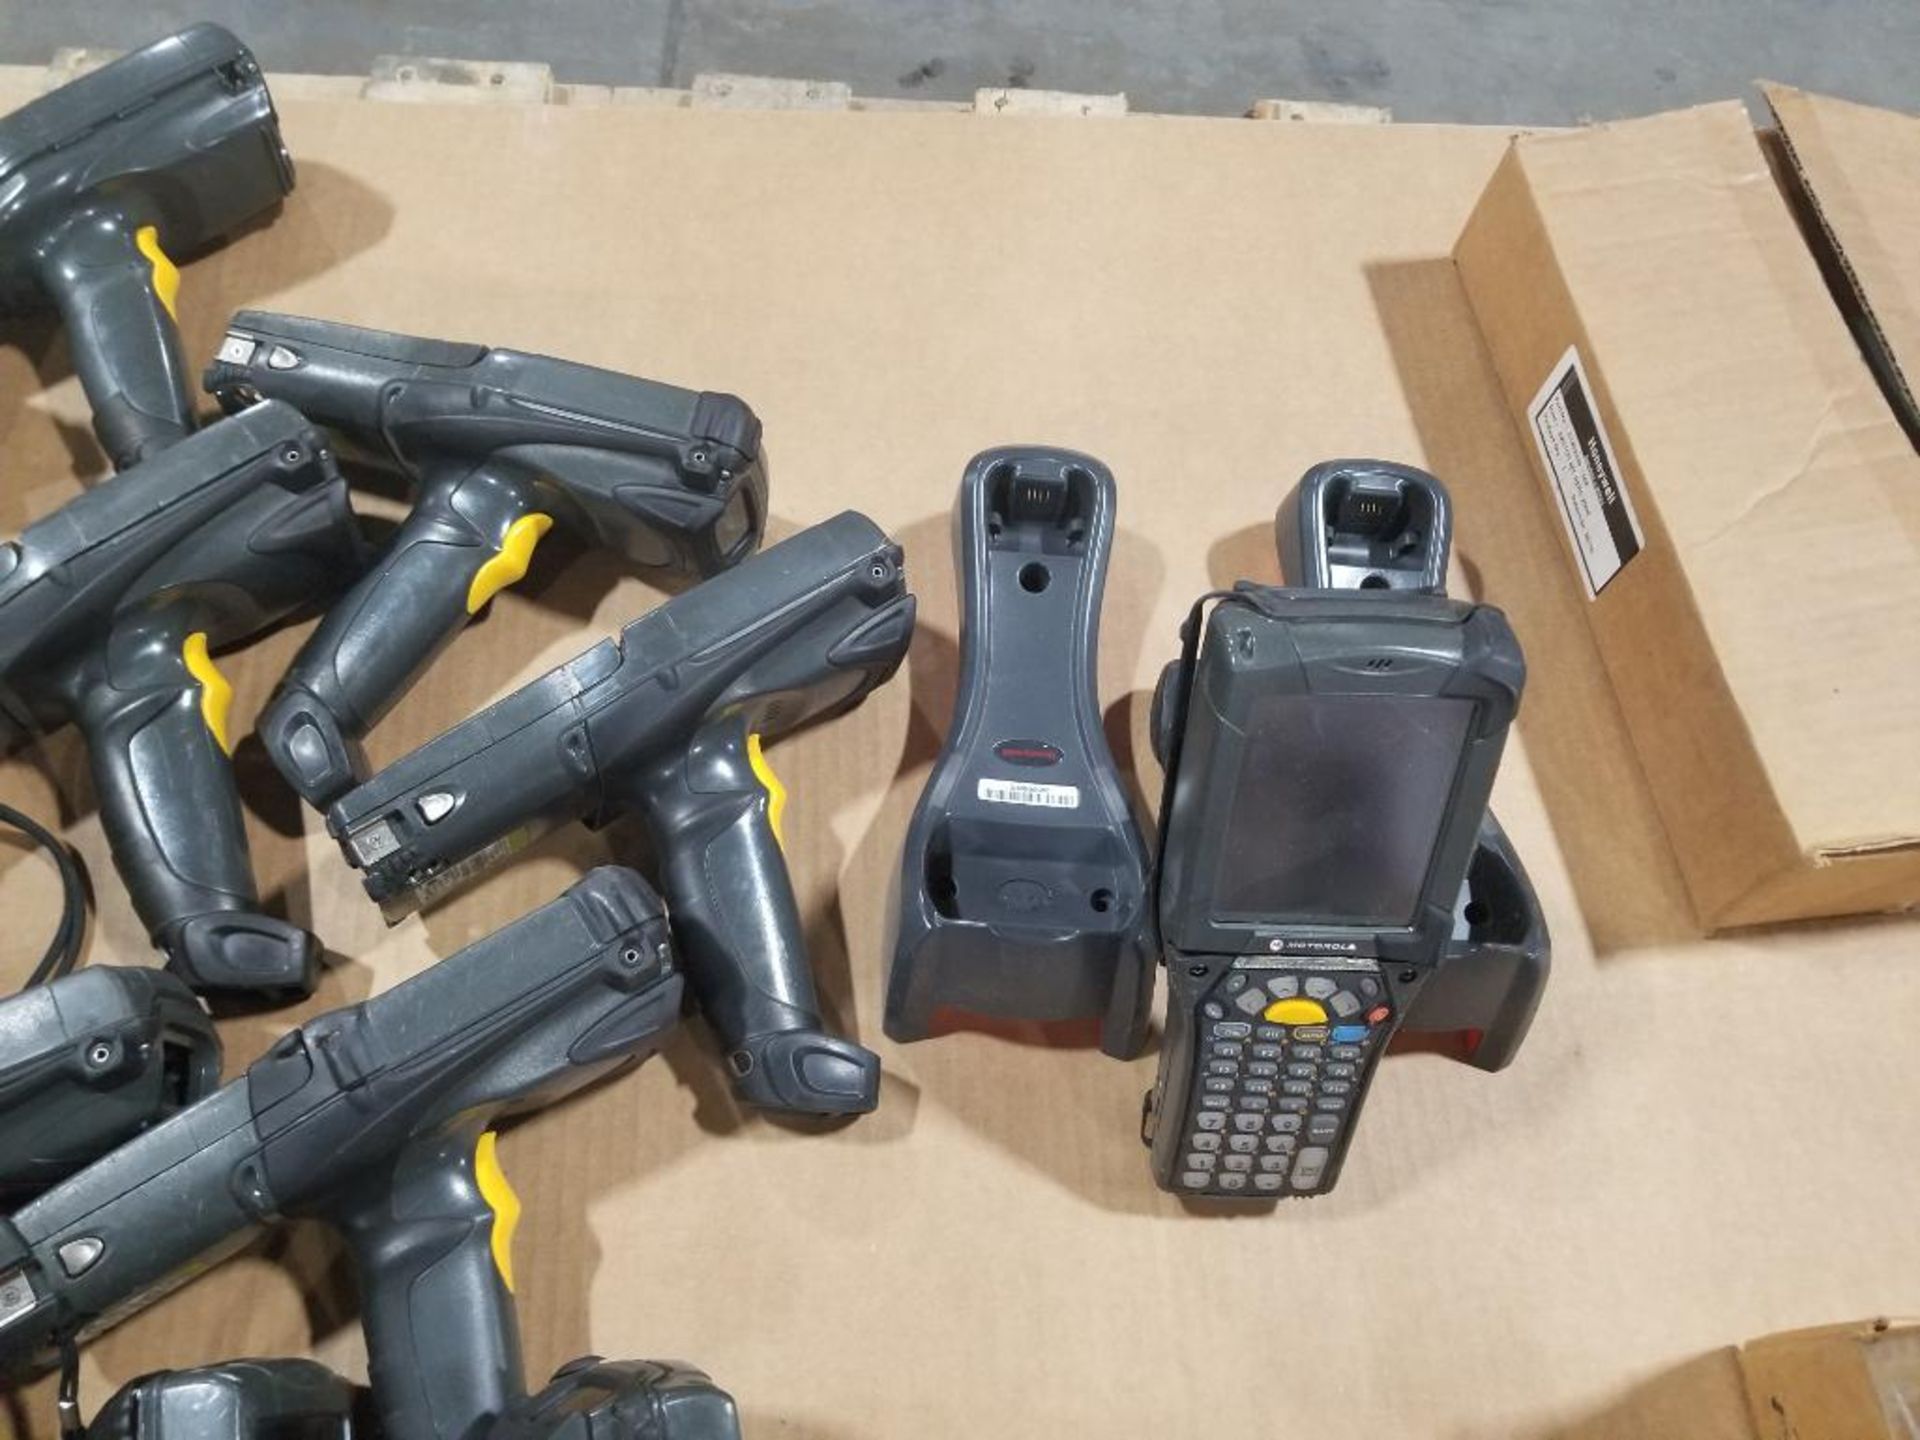 Large assortment of hand held bar code scanners. - Image 6 of 13